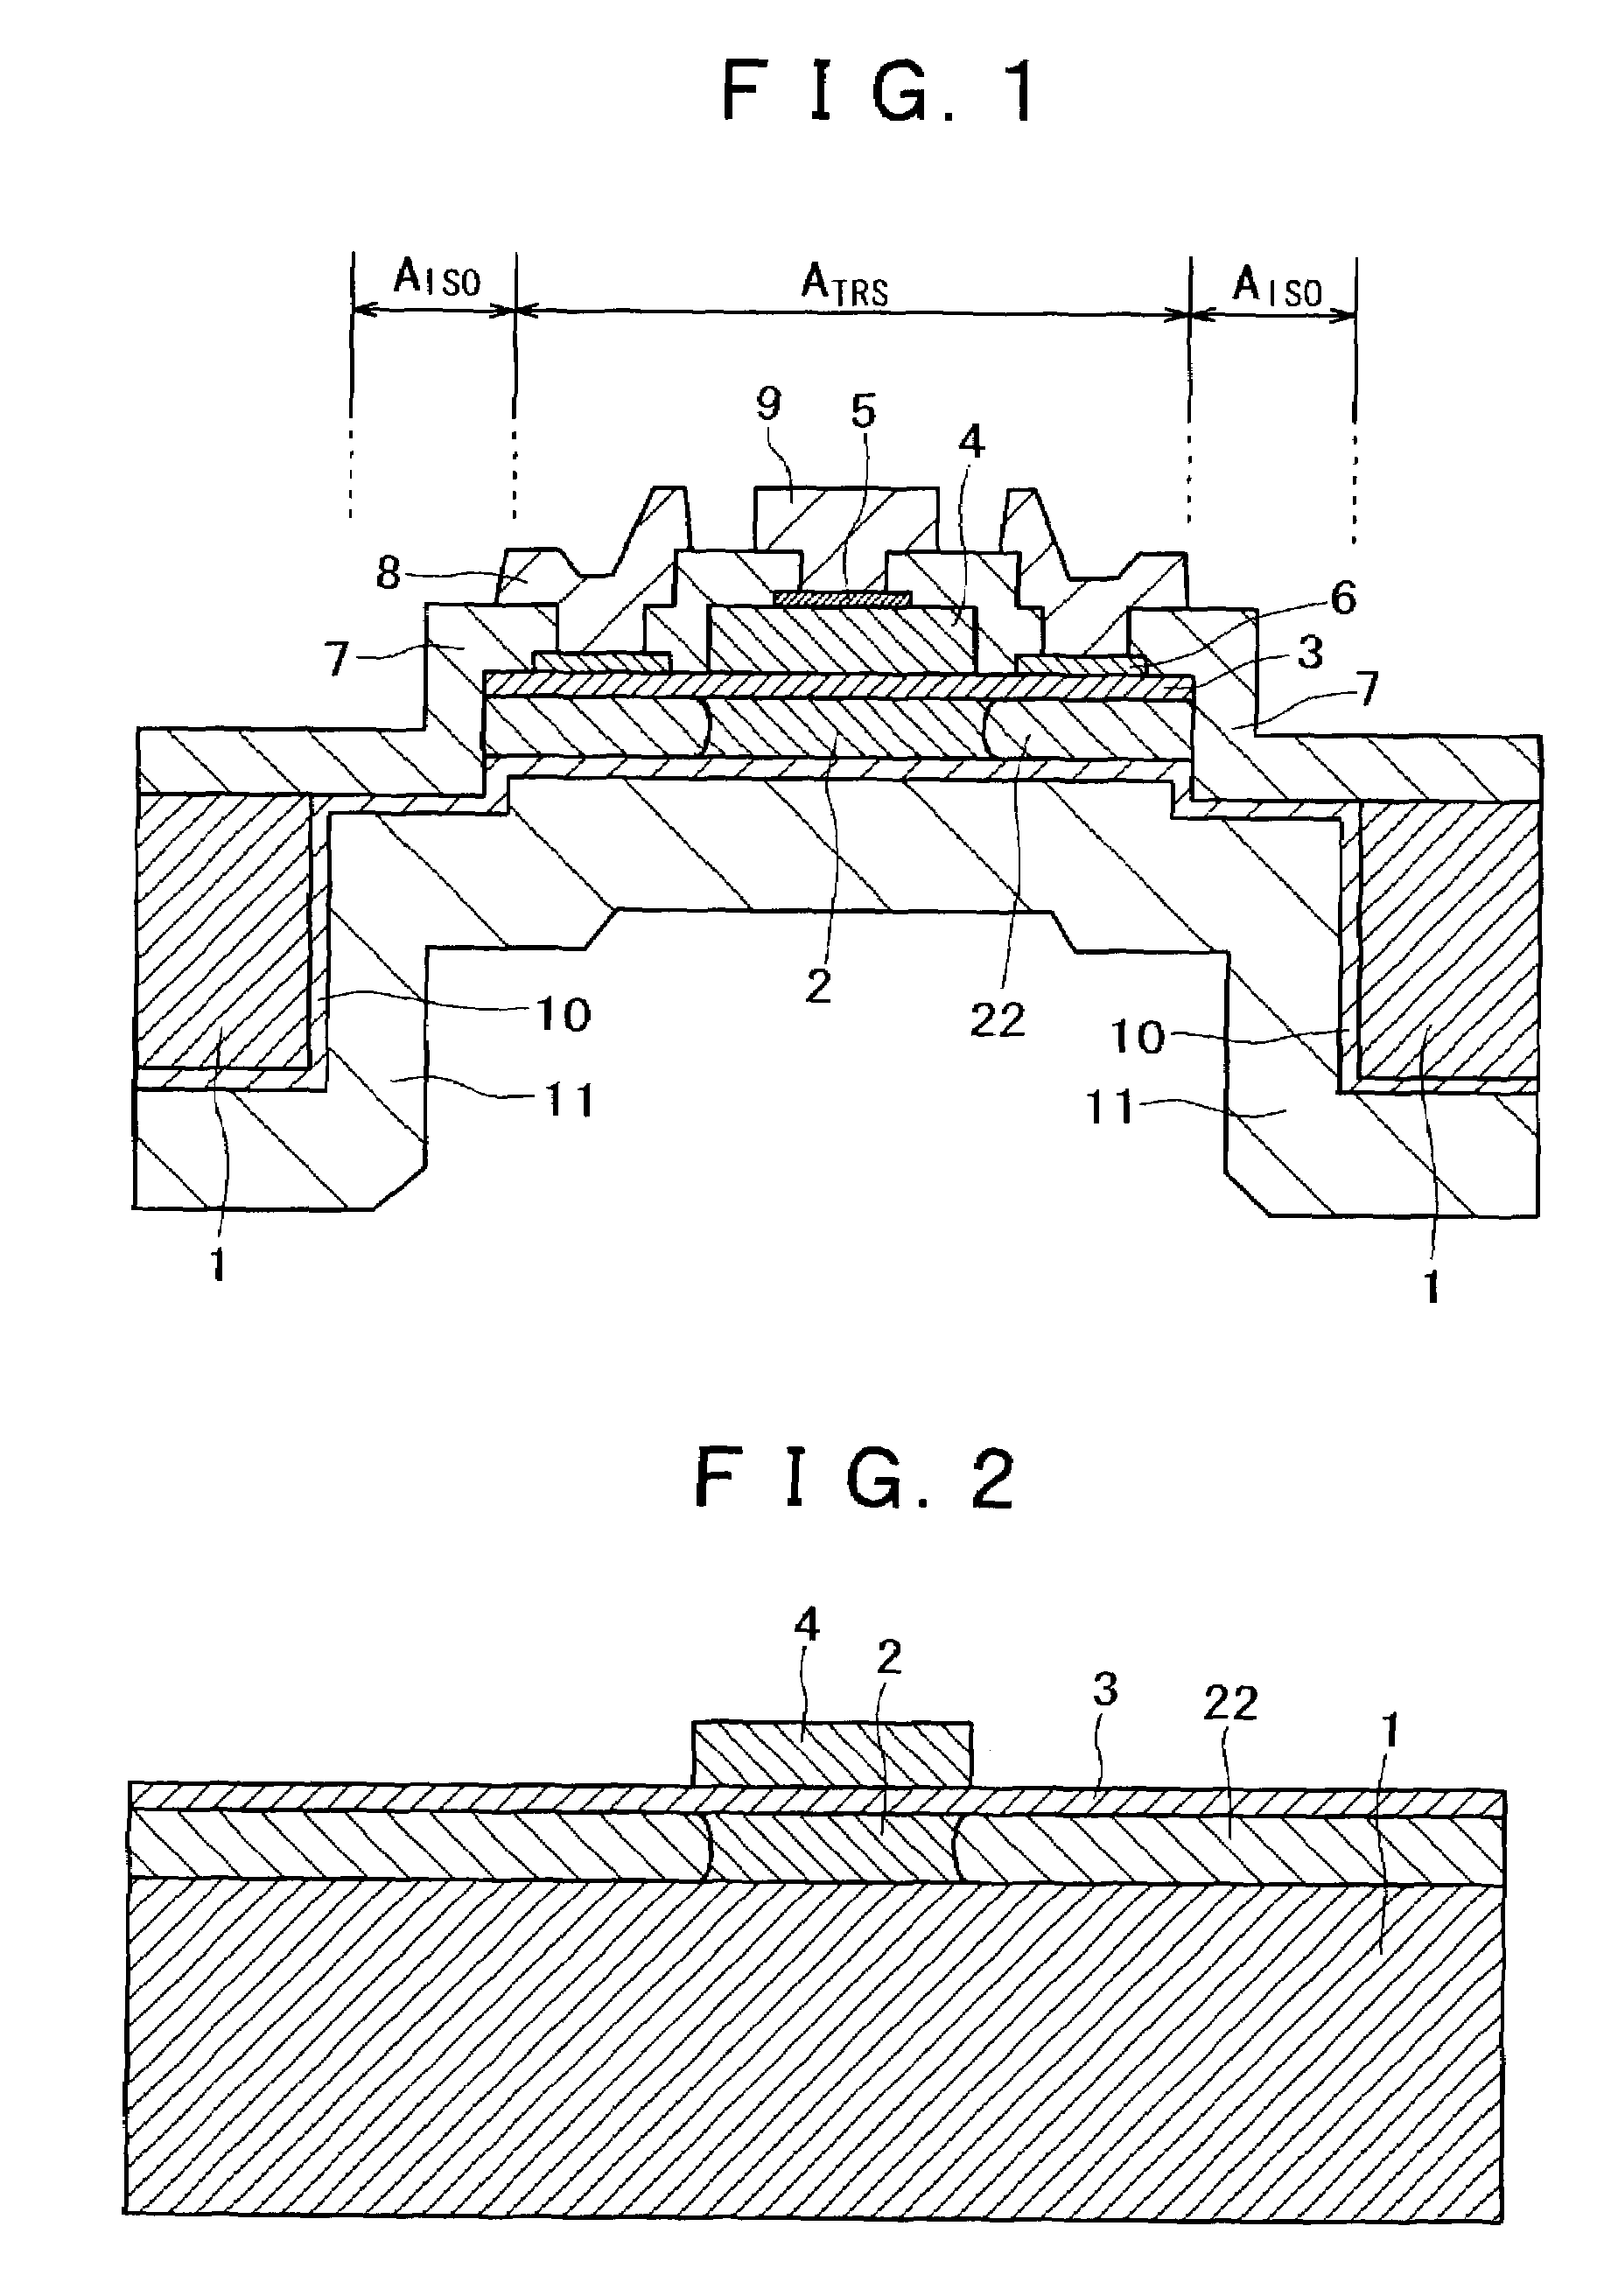 Semiconductor device with high structural reliability and low parasitic capacitance